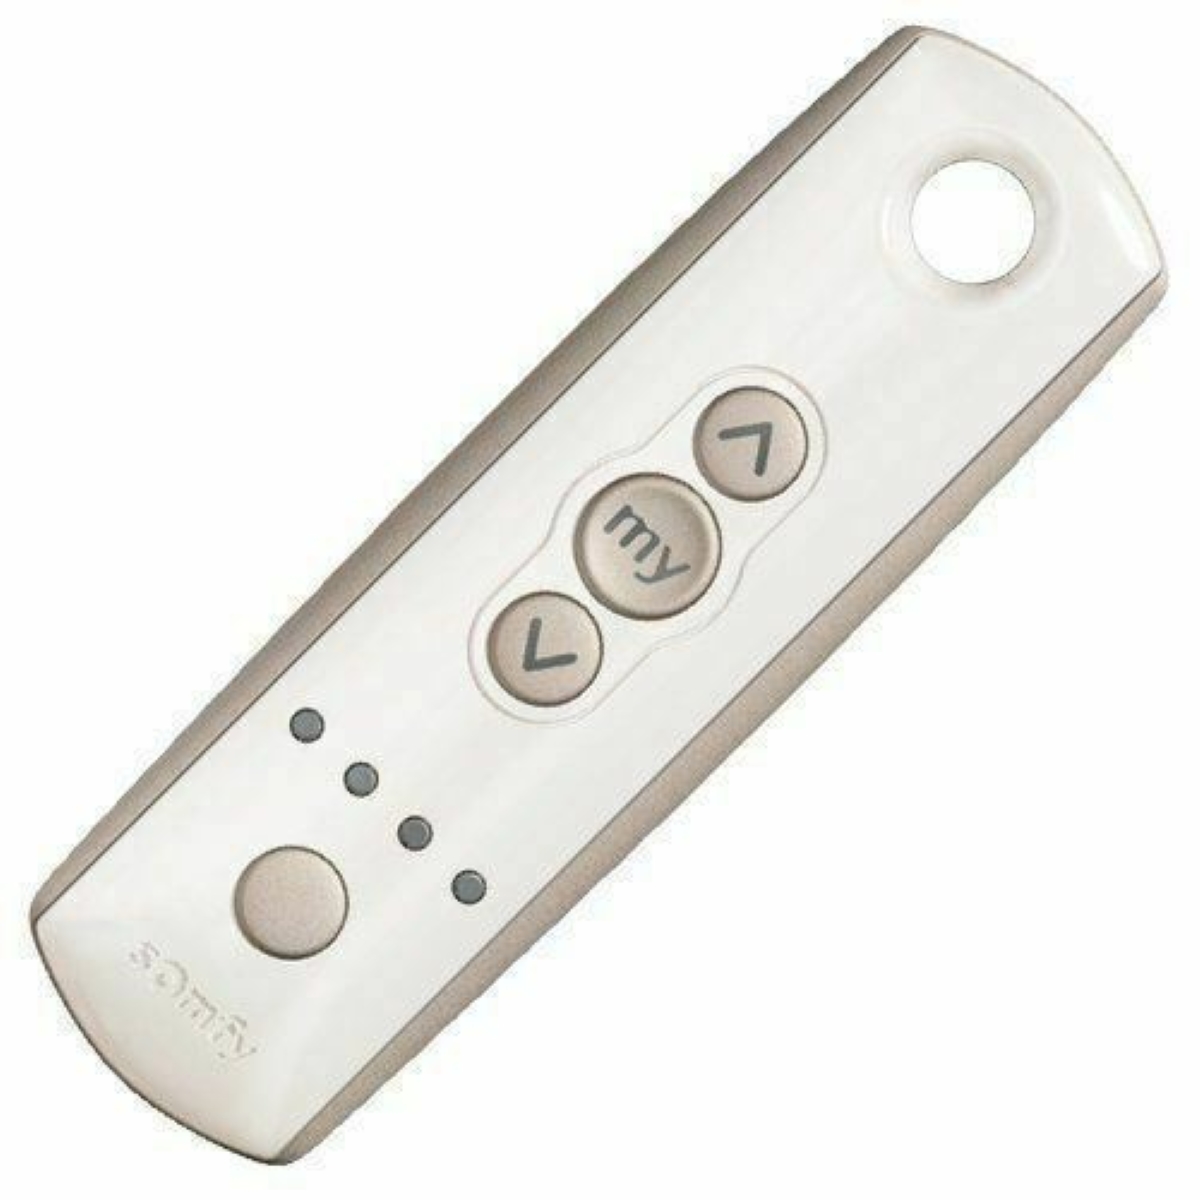 Somfy Telis 4 RTS Pure Remote, 5 Channel (1810633) - image 2 of 5